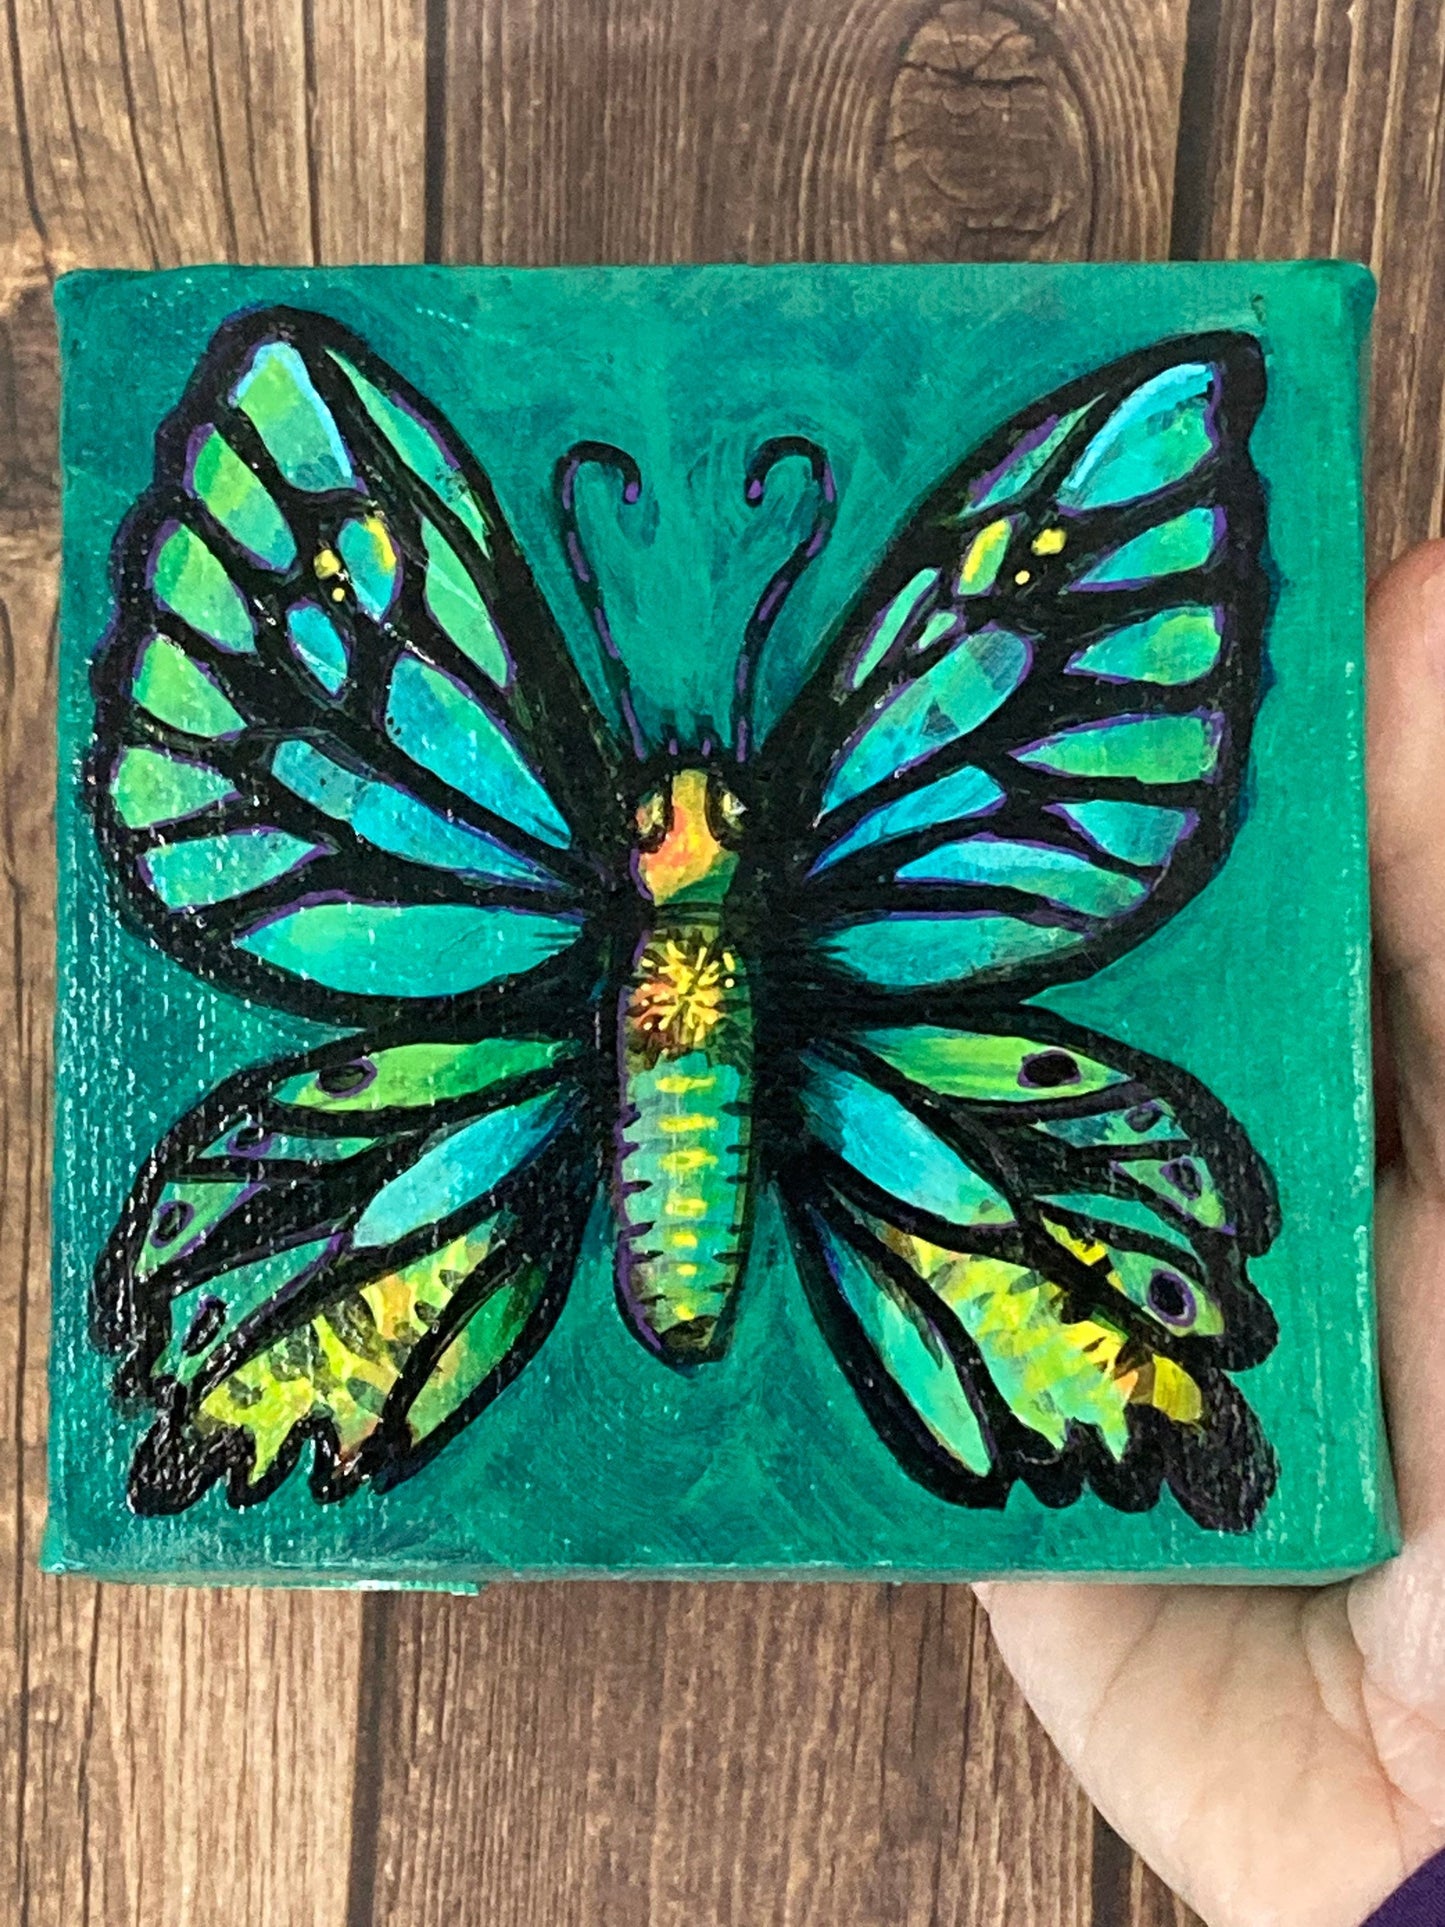 Butterfly on Teal 4"/10cm square mini original painting of a butterfly on a teal background, by Adriana Bergstrom